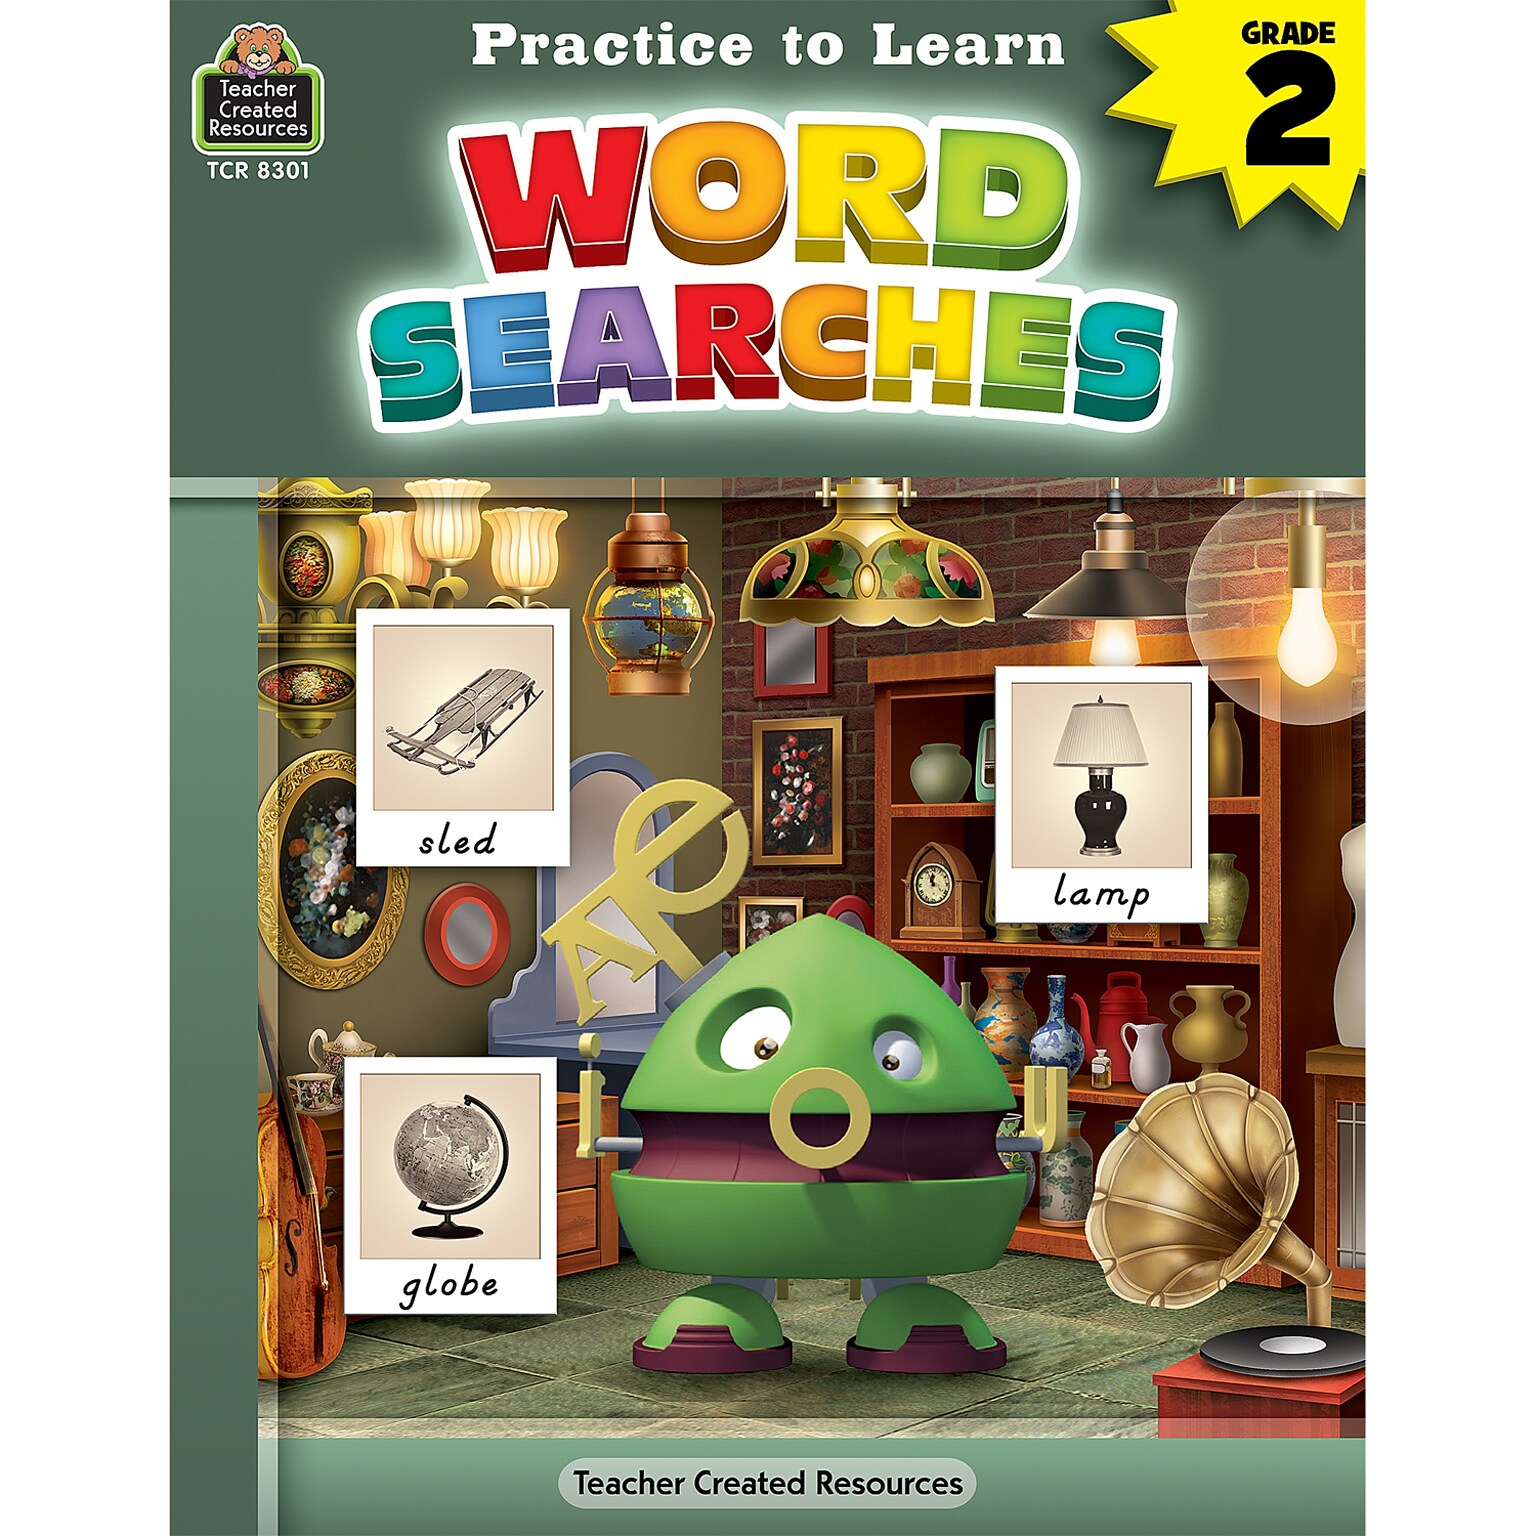 Teacher Created Resources Practice to Learn: Word Searches